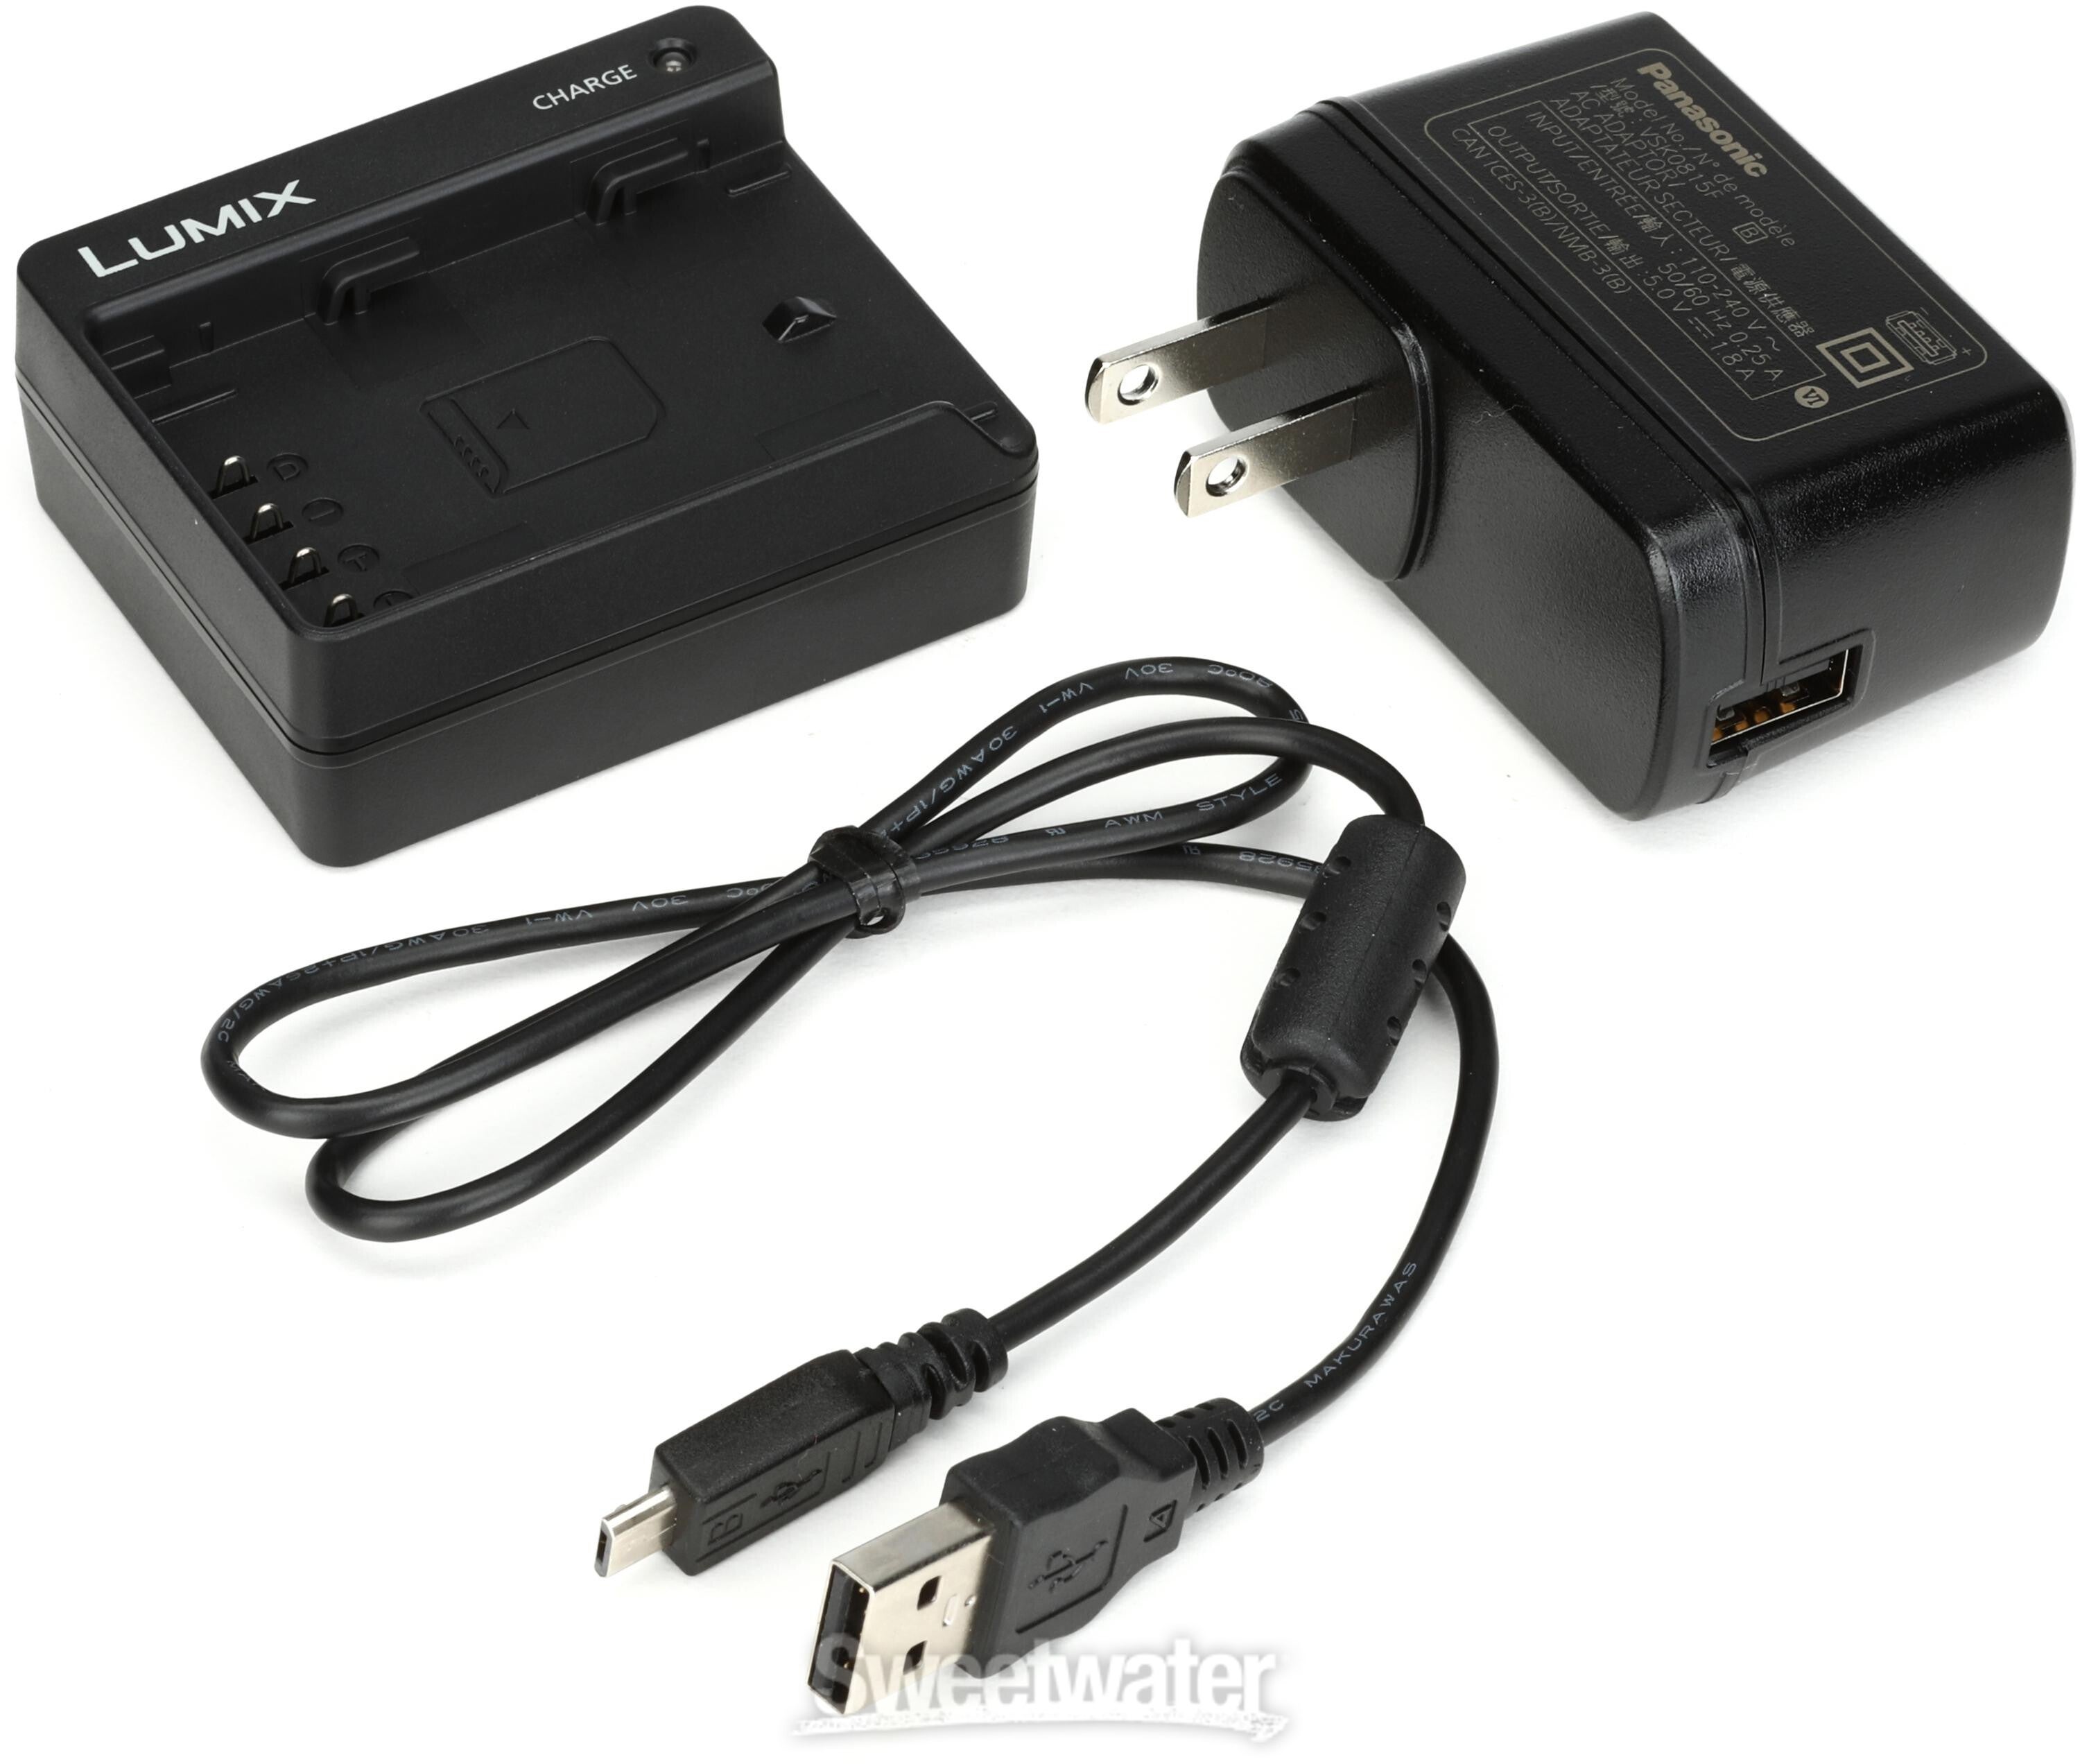 Panasonic DMW-BTC13 Battery Charger for DMW-BLF19 | Sweetwater